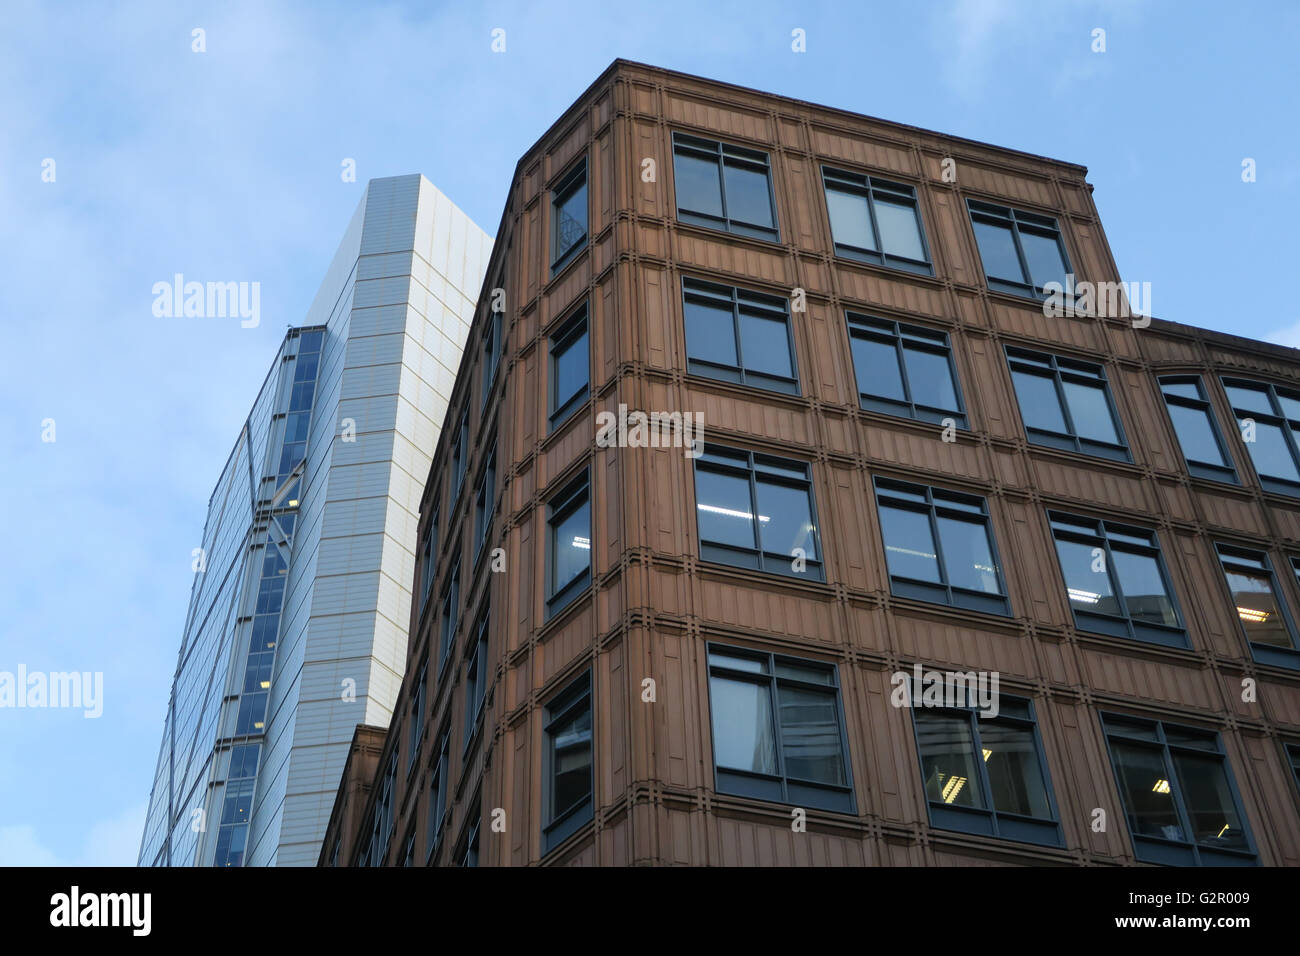 Large commercial buildings against sky, architecture Stock Photo